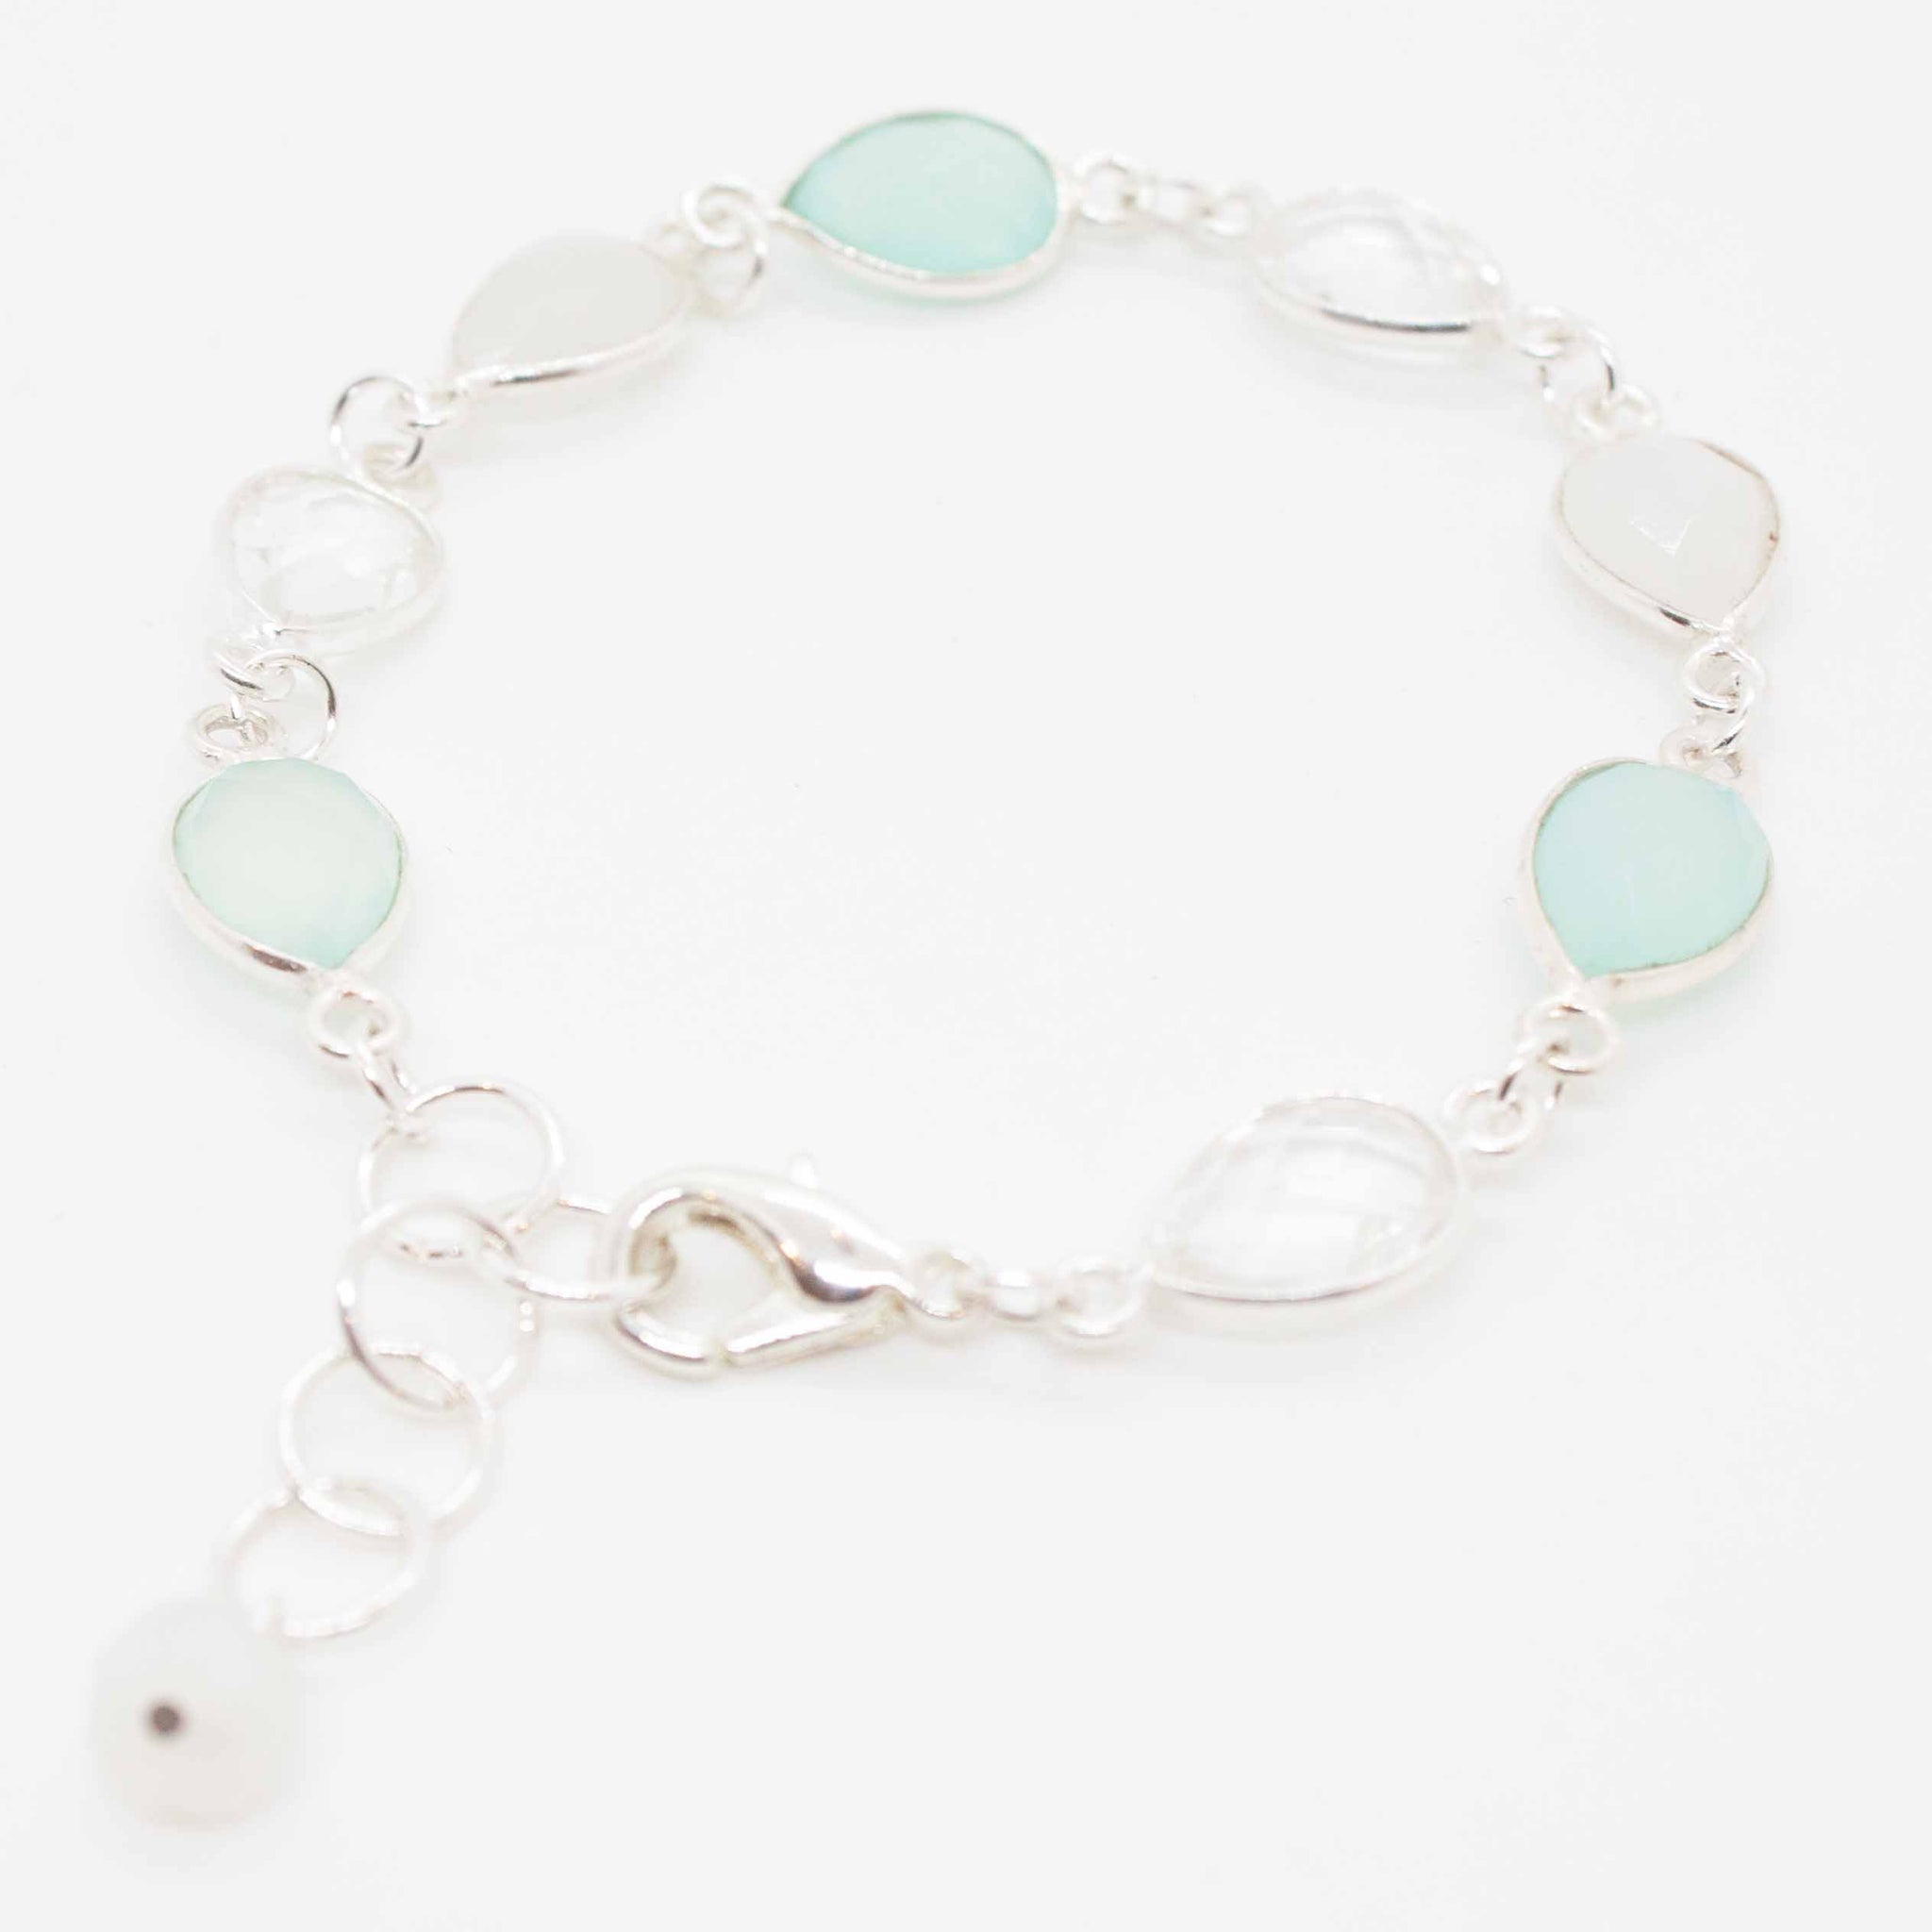 Summon the ocean with this serene and sparkly bracelet made of chalcedony, quartz and moonstone. 7 inch (adjustable) sterling silver, chalcedony (light blue), quartz (clear) and moonstone (white) bracelet. Handmade in Toronto by kp jewelry co.